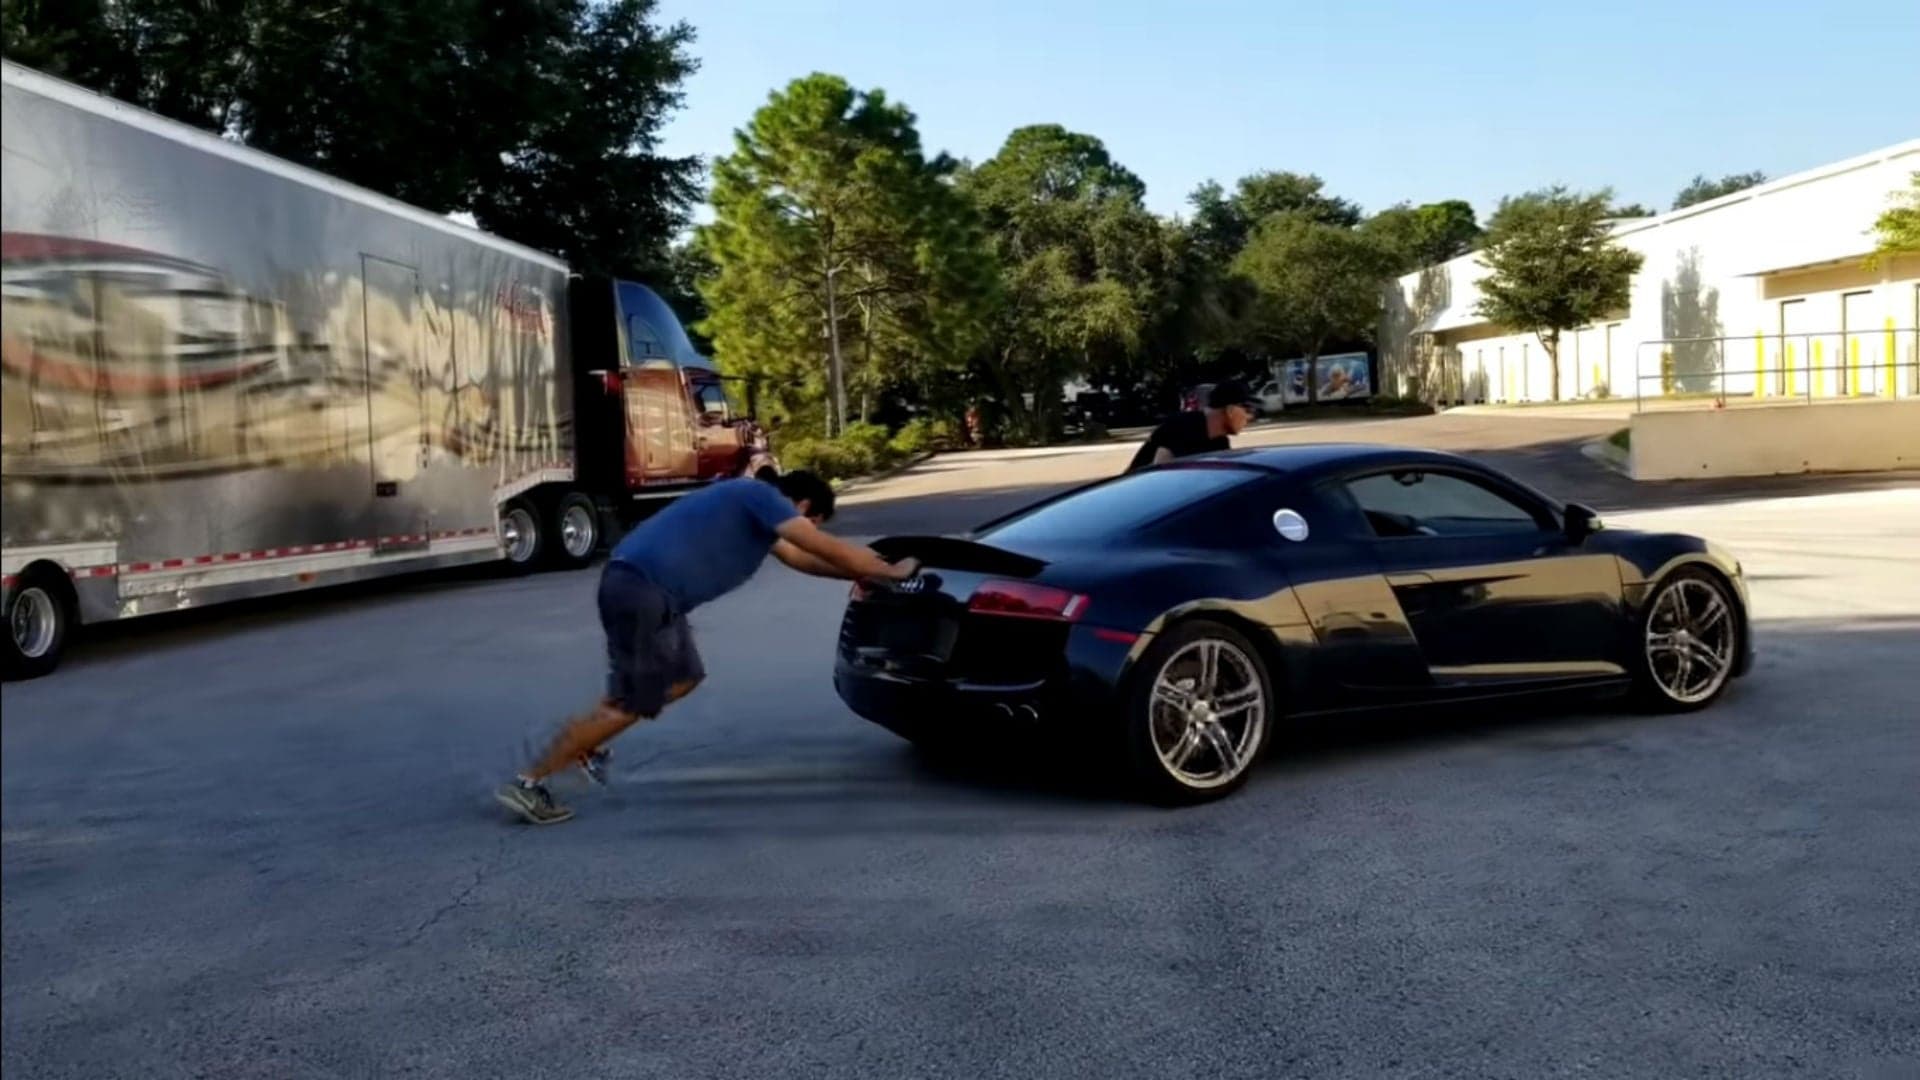 Youtuber Shows What It Takes to Get a Half-Price, Totalled Audi R8 Back on the Road